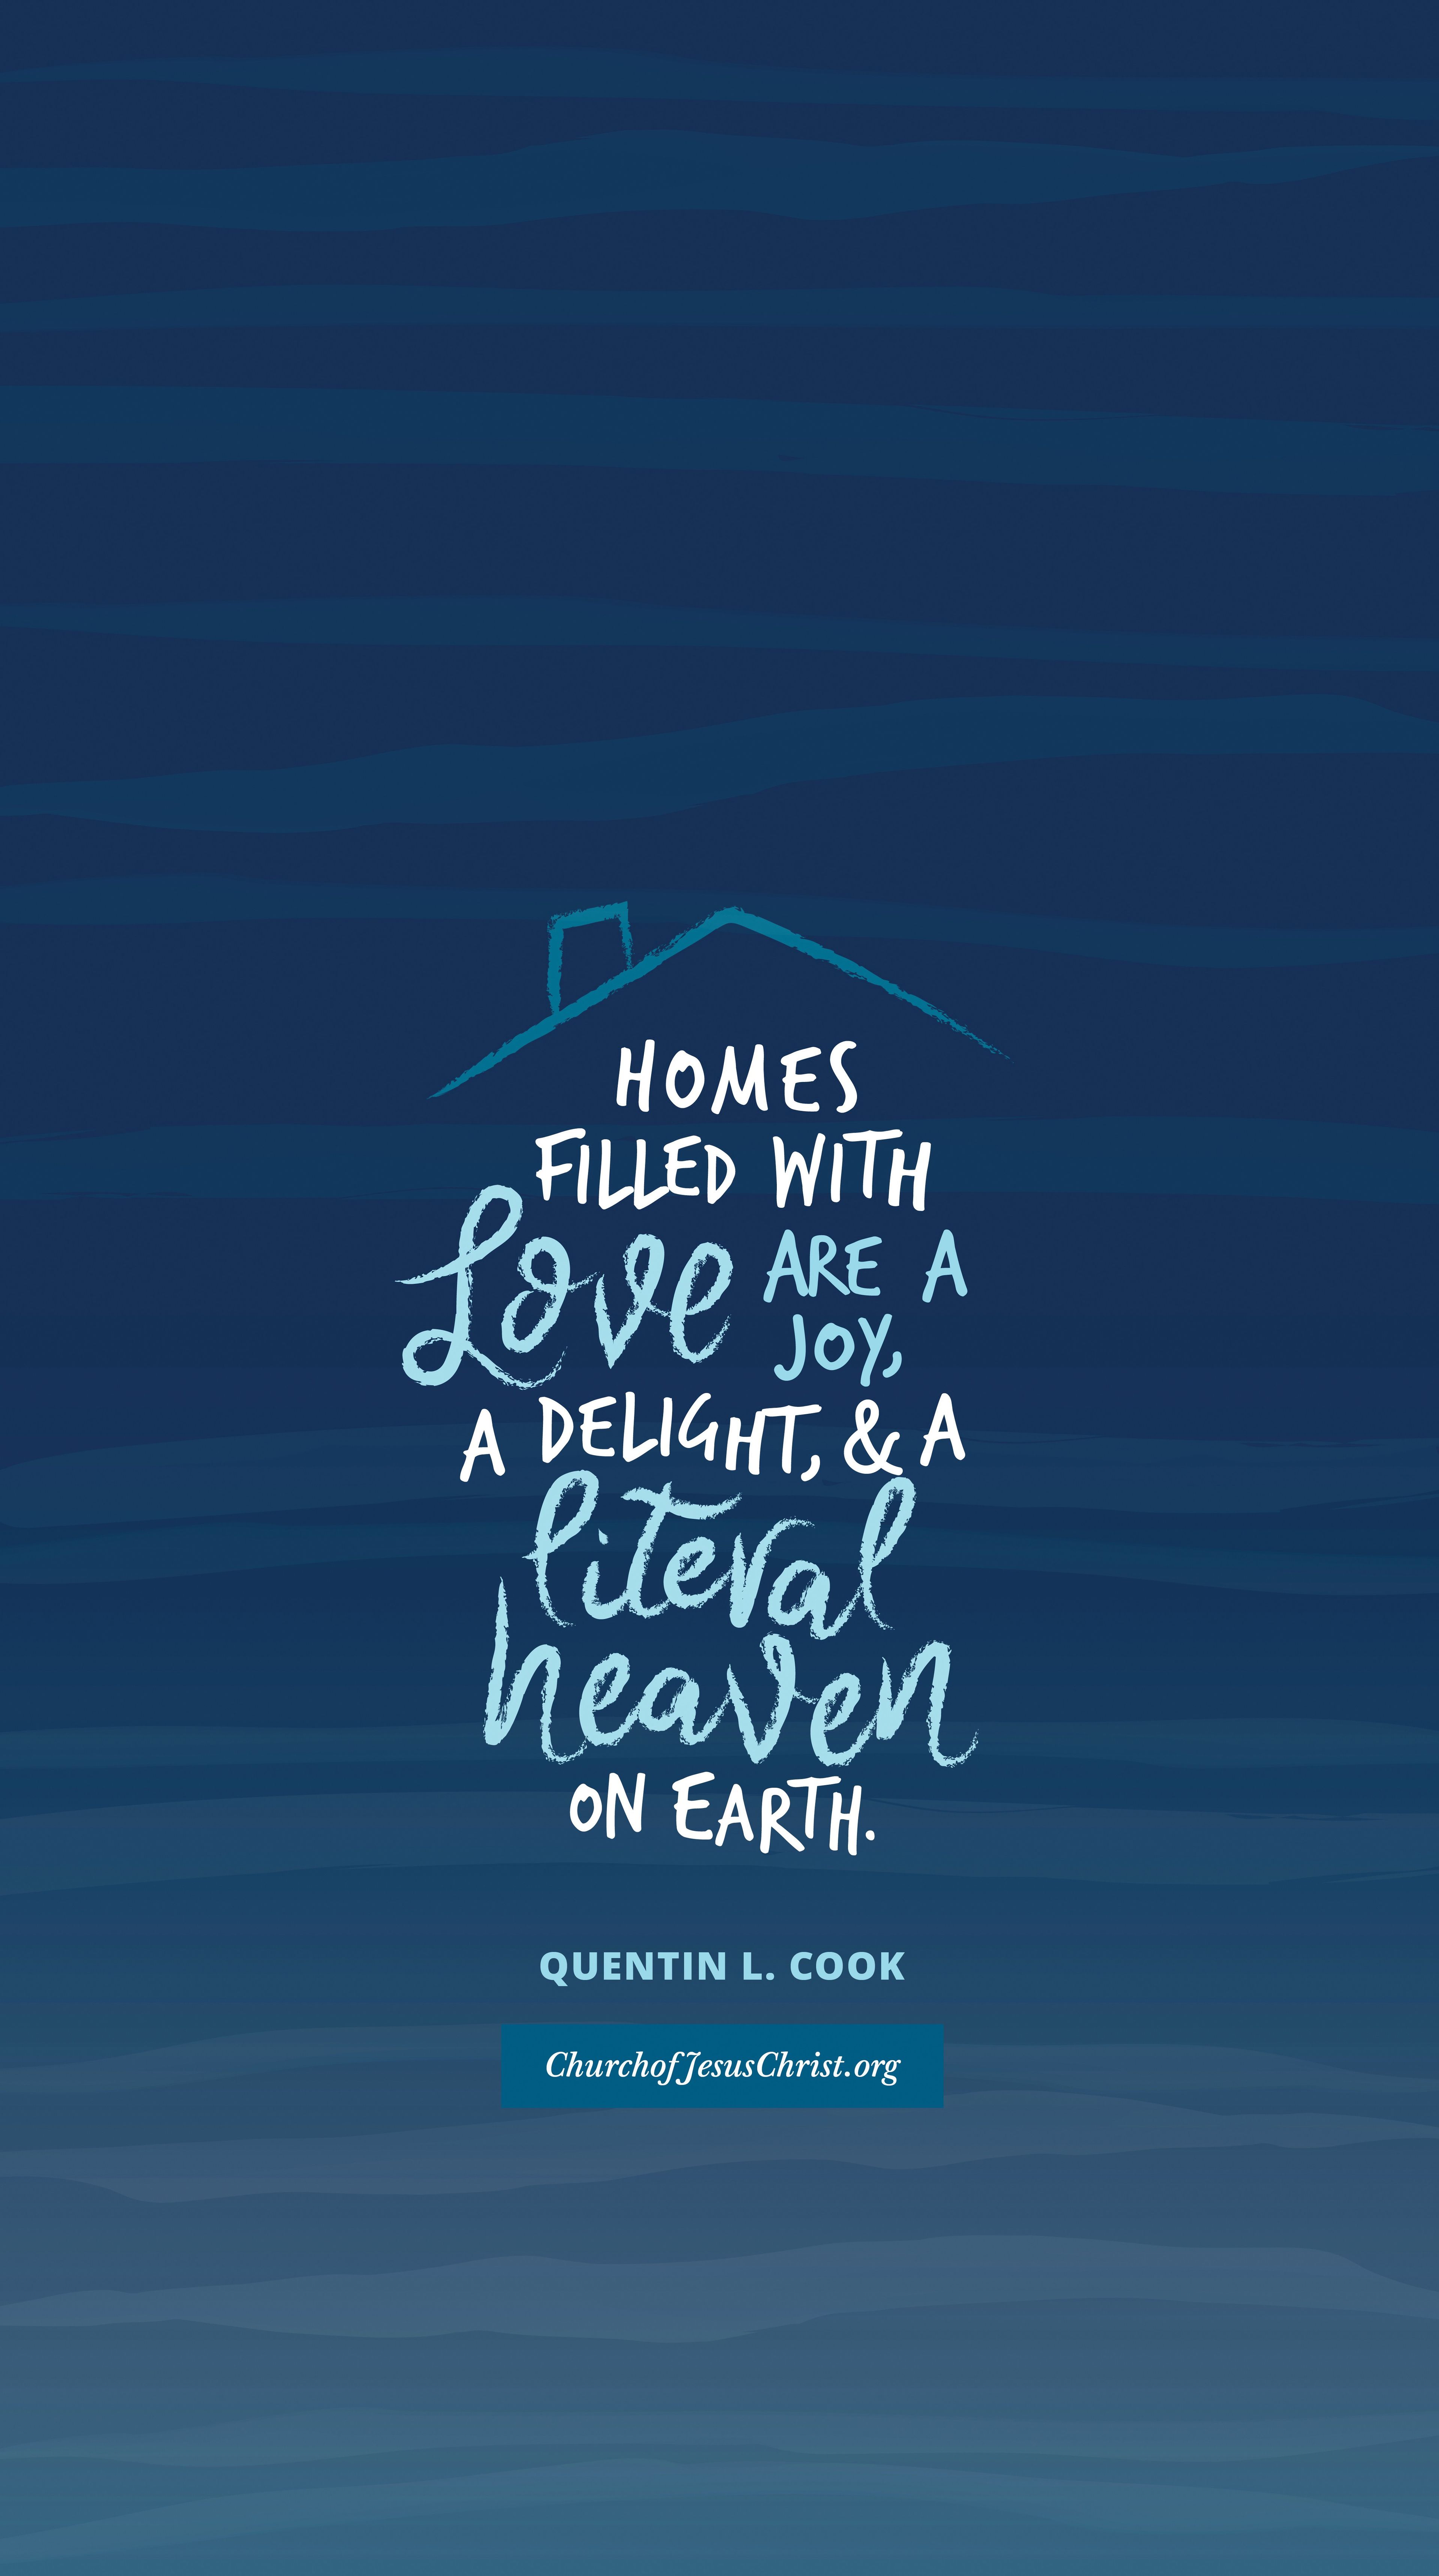 "Homes filled with love are a joy, a delight, a literal heaven on earth." —Quentin L. Cook